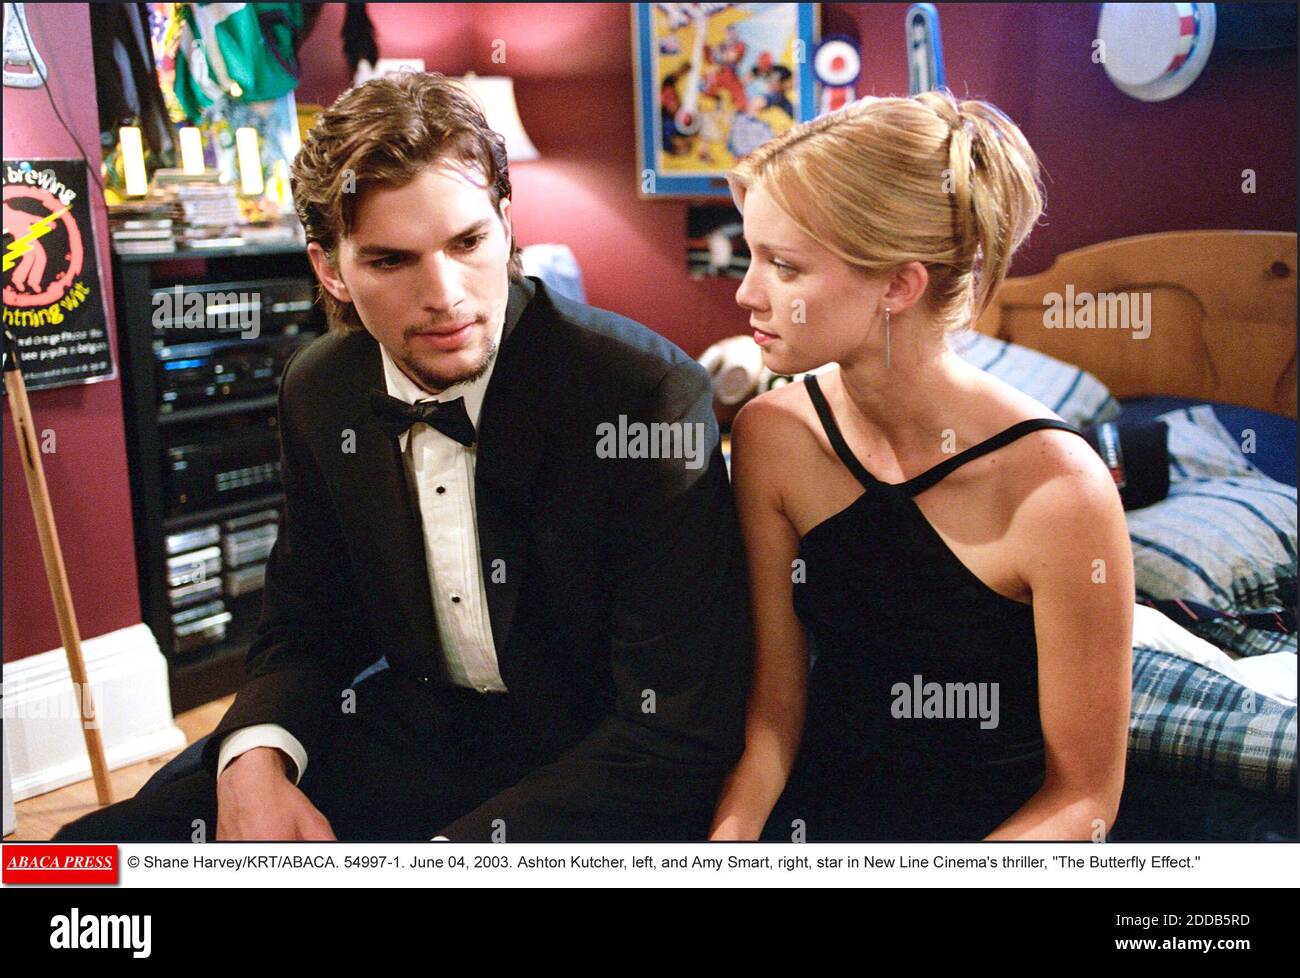 NO FILM, NO VIDEO, NO TV, NO DOCUMENTARY - © Shane Harvey/KRT/ABACA. 54997-1. June 04, 2003. Ashton Kutcher, left, and Amy Smart, right, star in New Line Cinema's thriller, The Butterfly Effect. Stock Photo